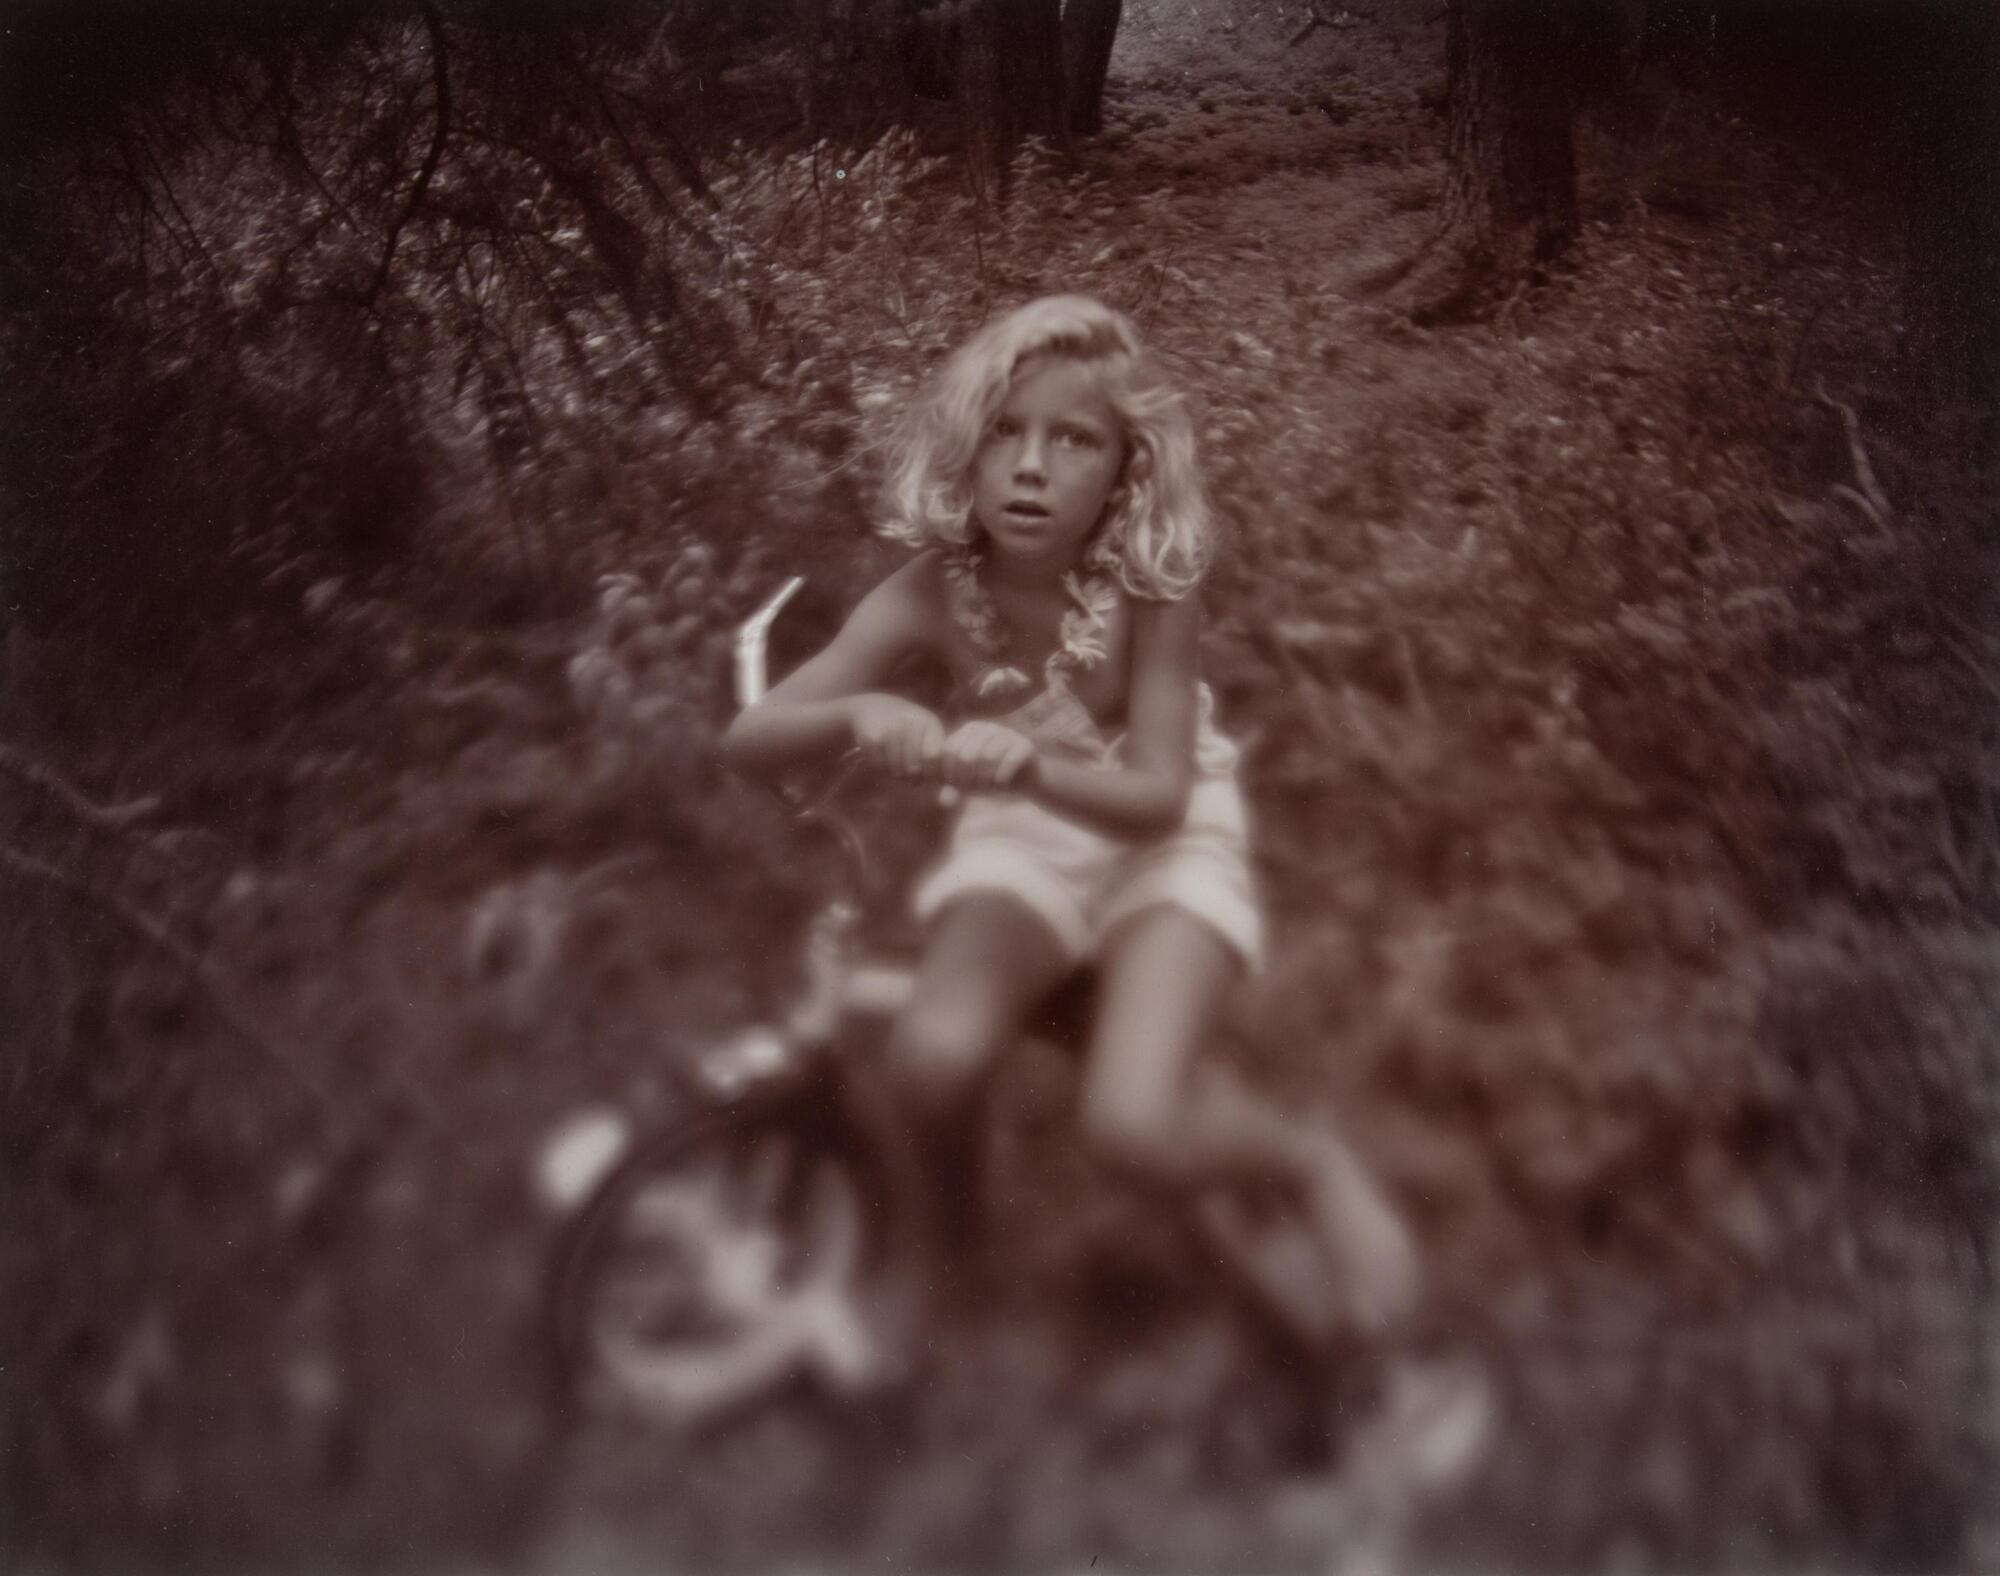 In this photograph of a young girl in a forest clearing she sits on a bicycle, resting her arms on the handlebars. She wears a necklace made of flowers and a pair of light-colored overall shorts.